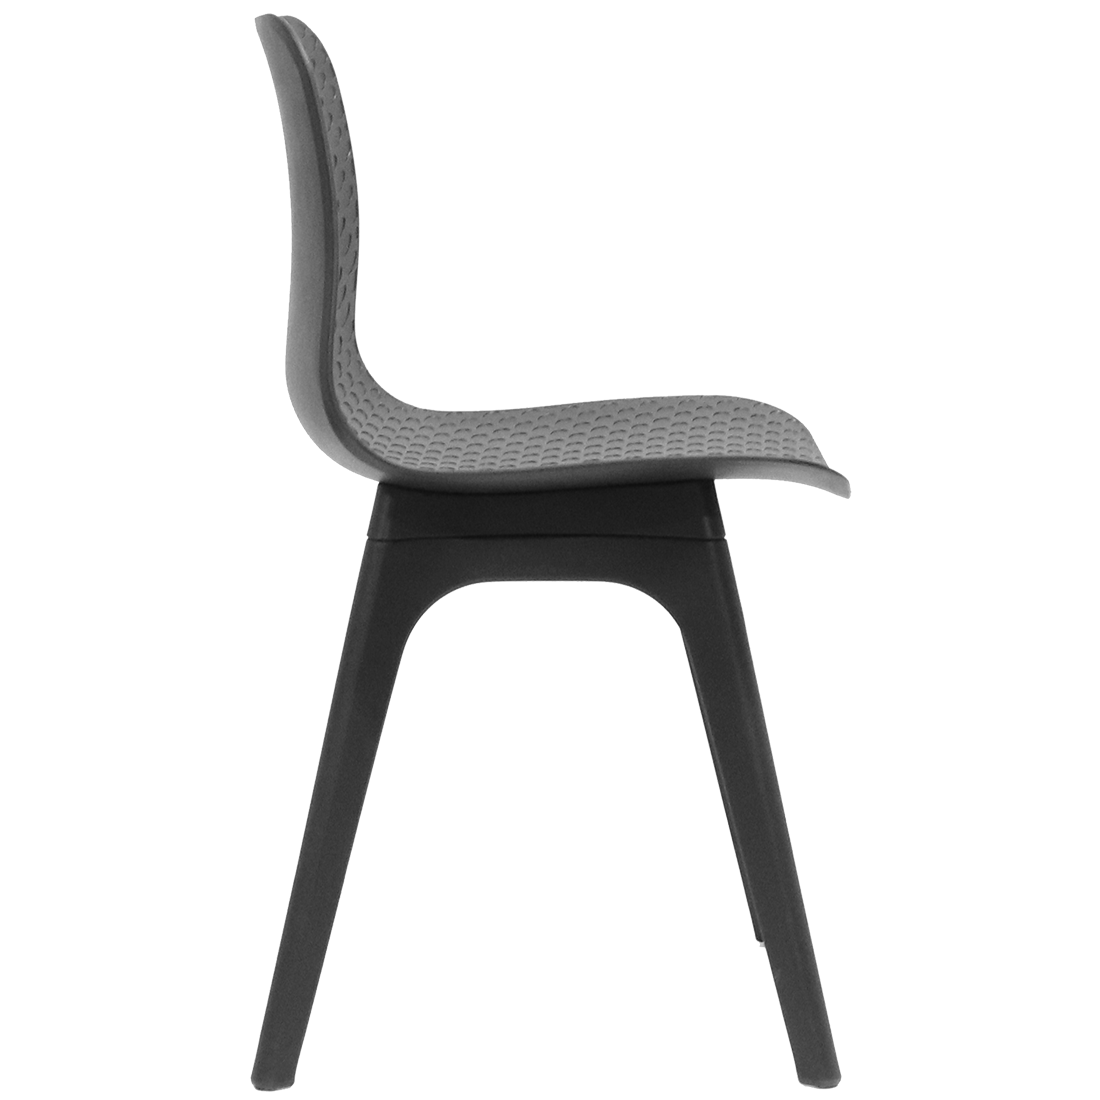 Lucid Visitor Chair - switchoffice.com.au